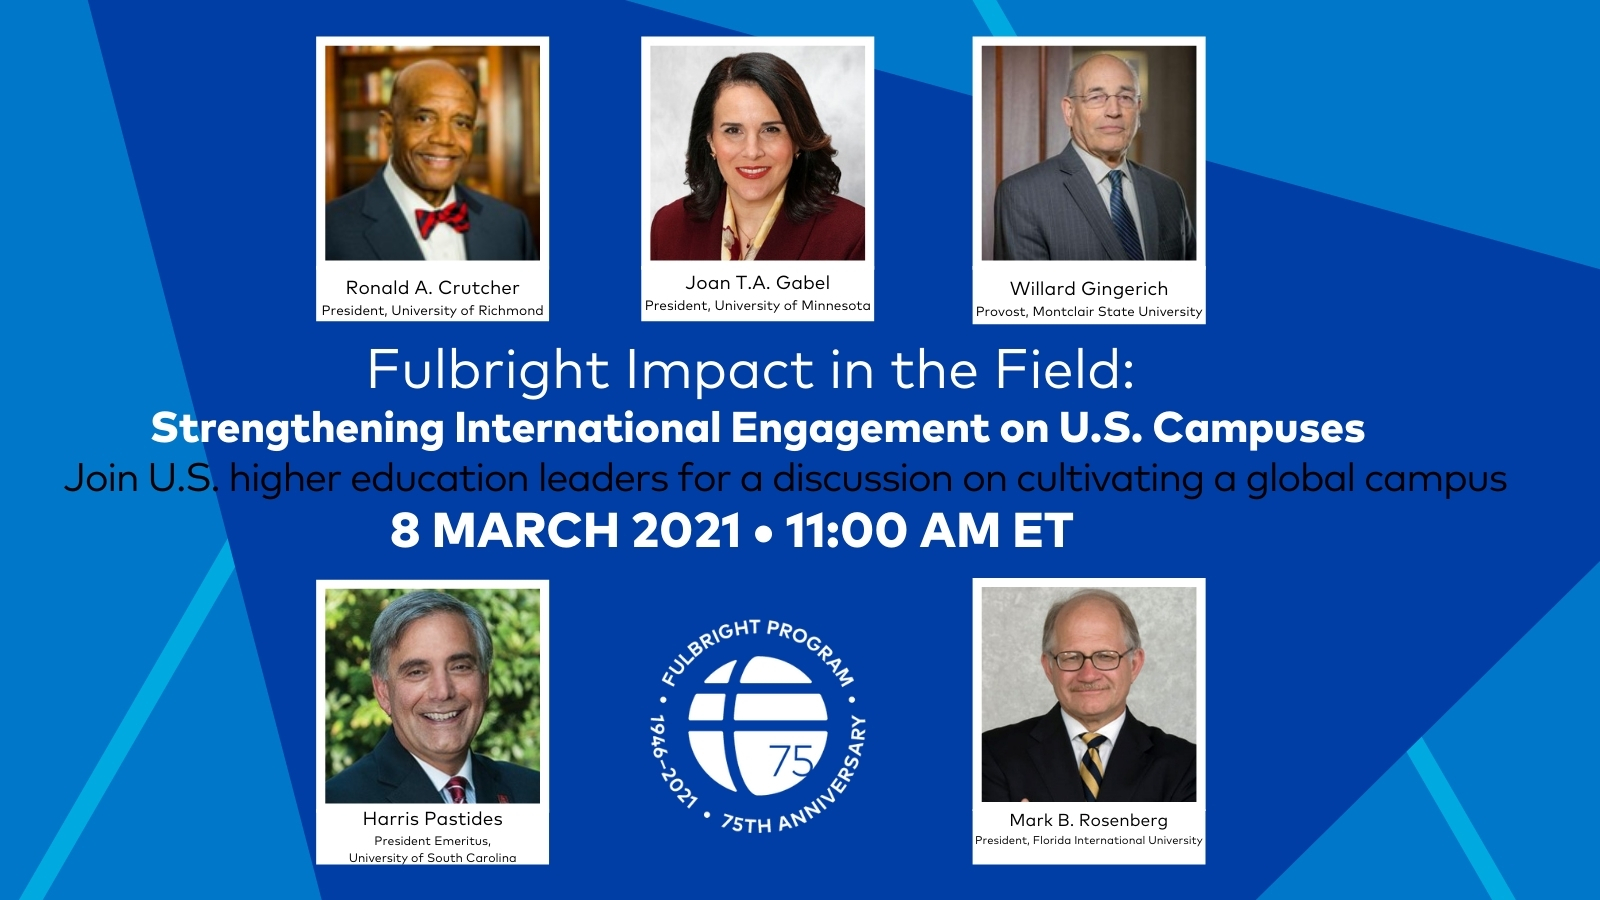 Fulbright Impact in the Field: Strengthening International Engagement on U.S. Campuses